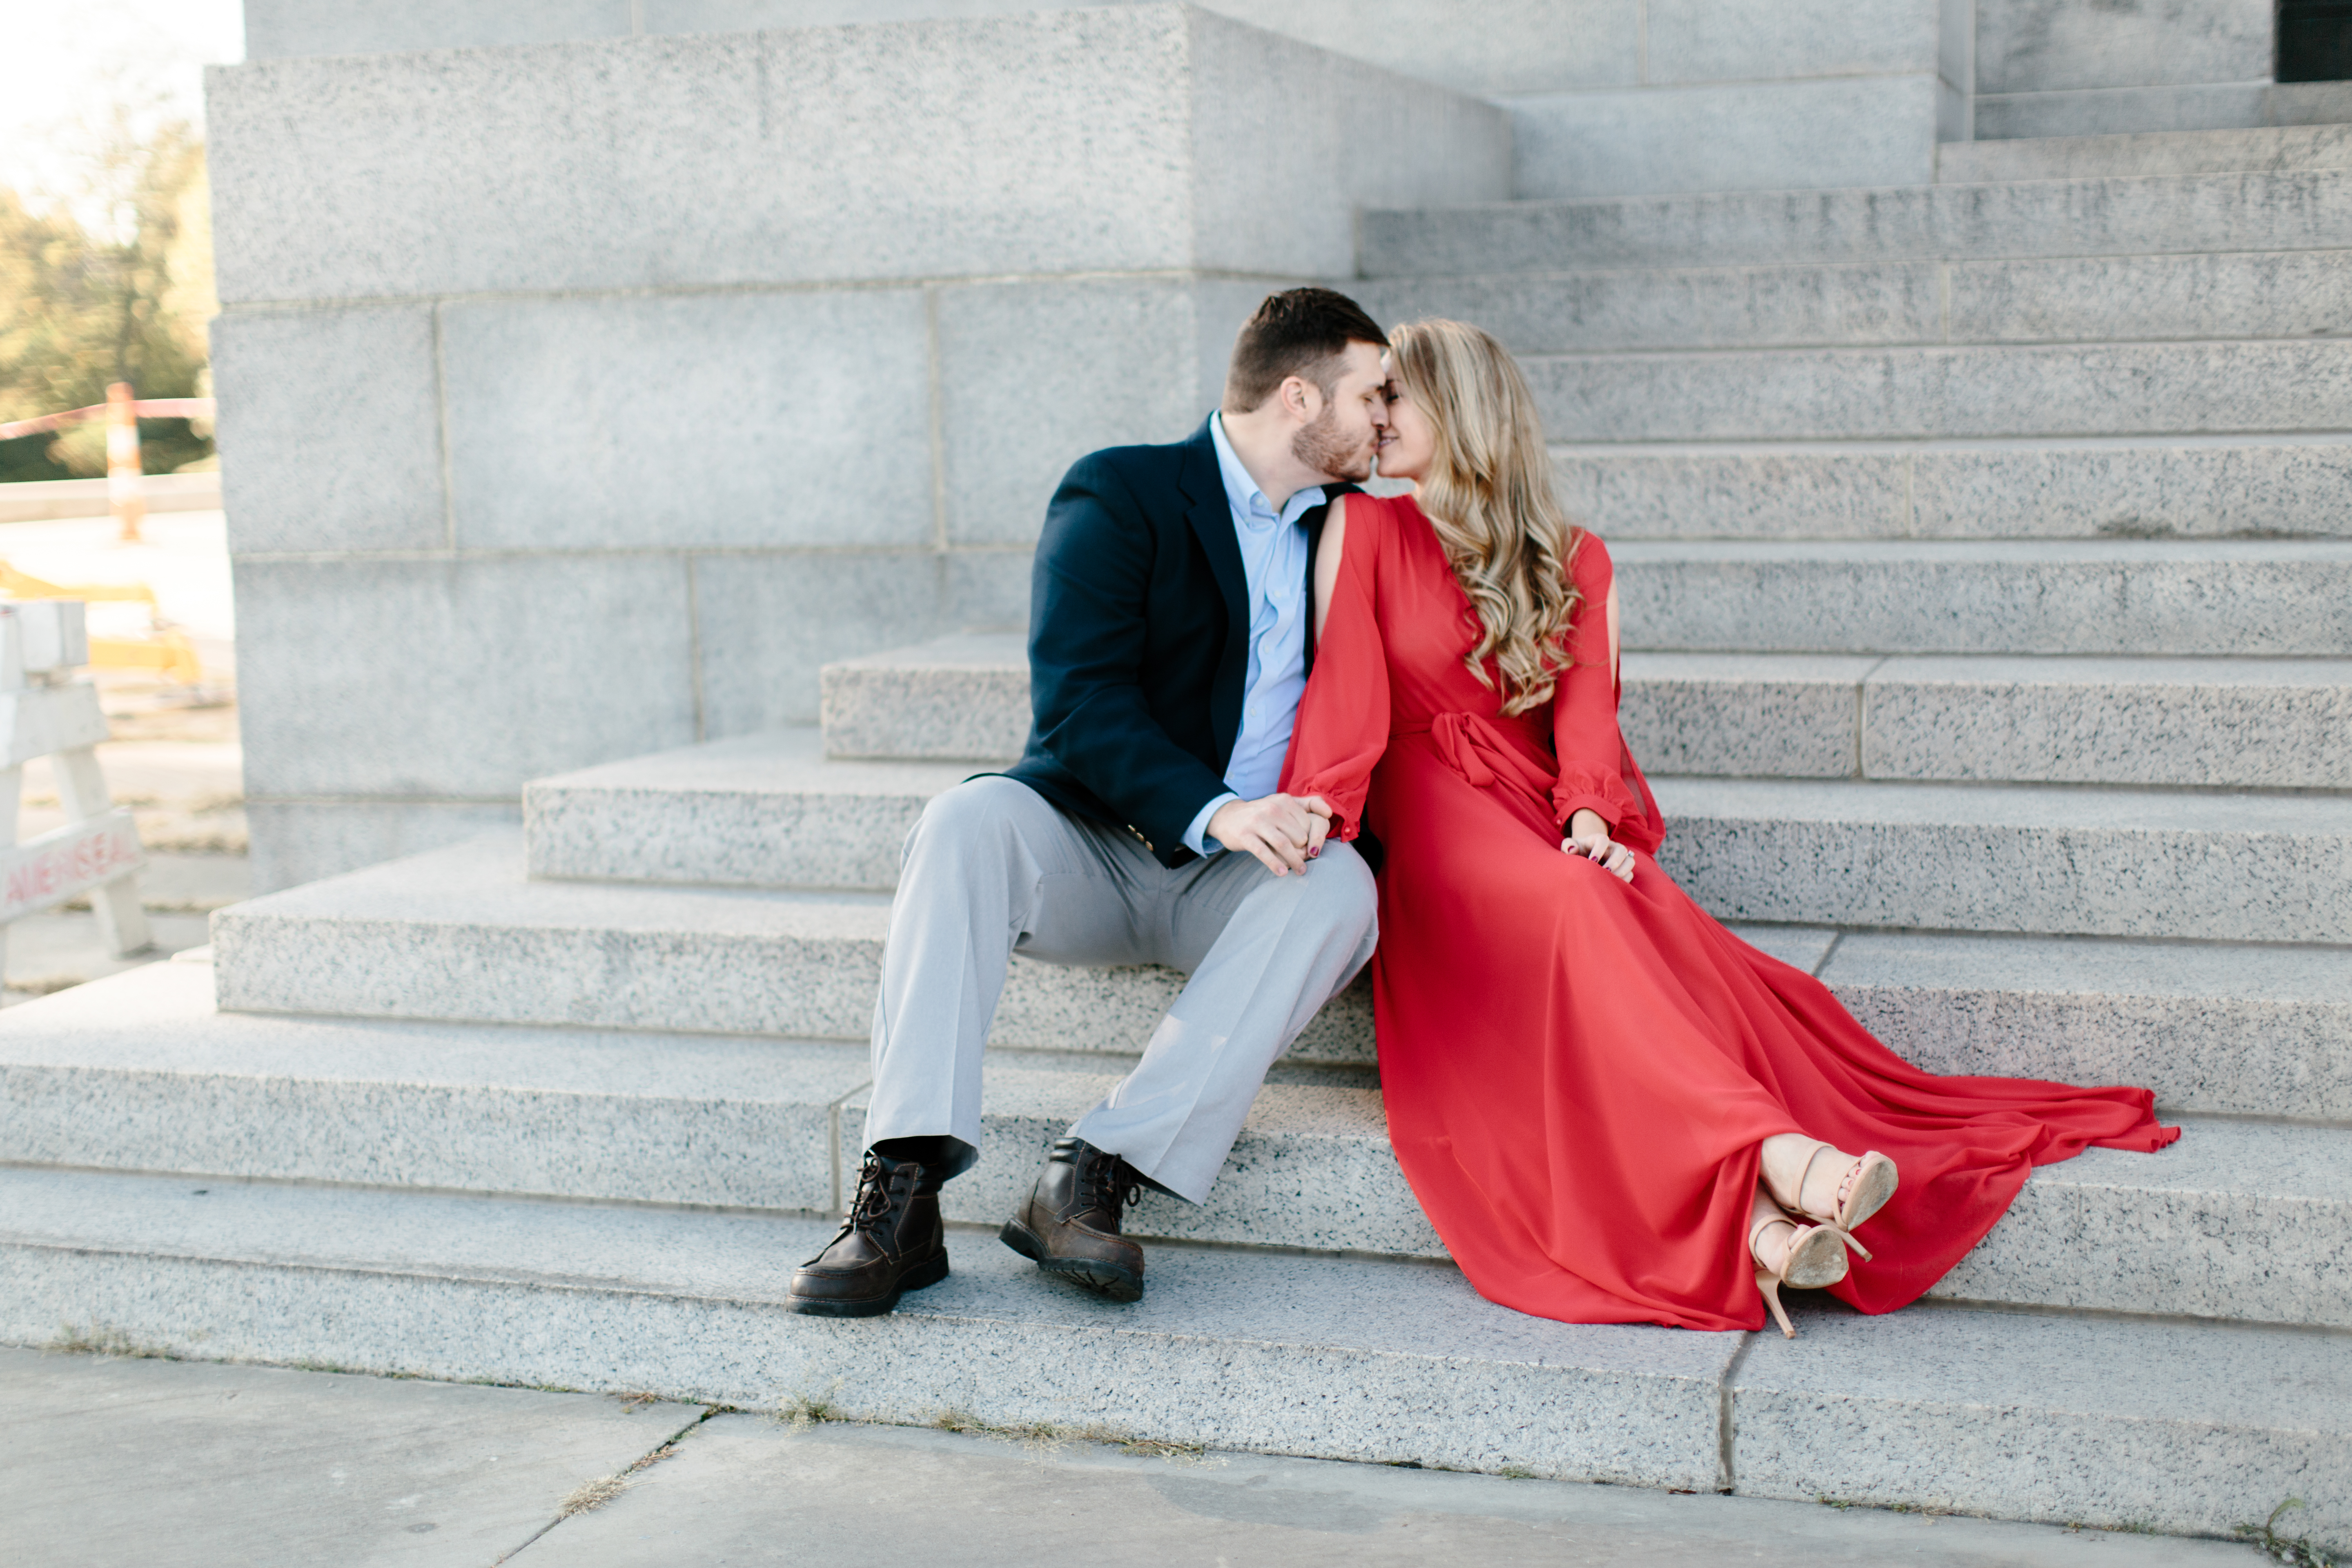 Engaged couple sitting on stairs in romantic red dress